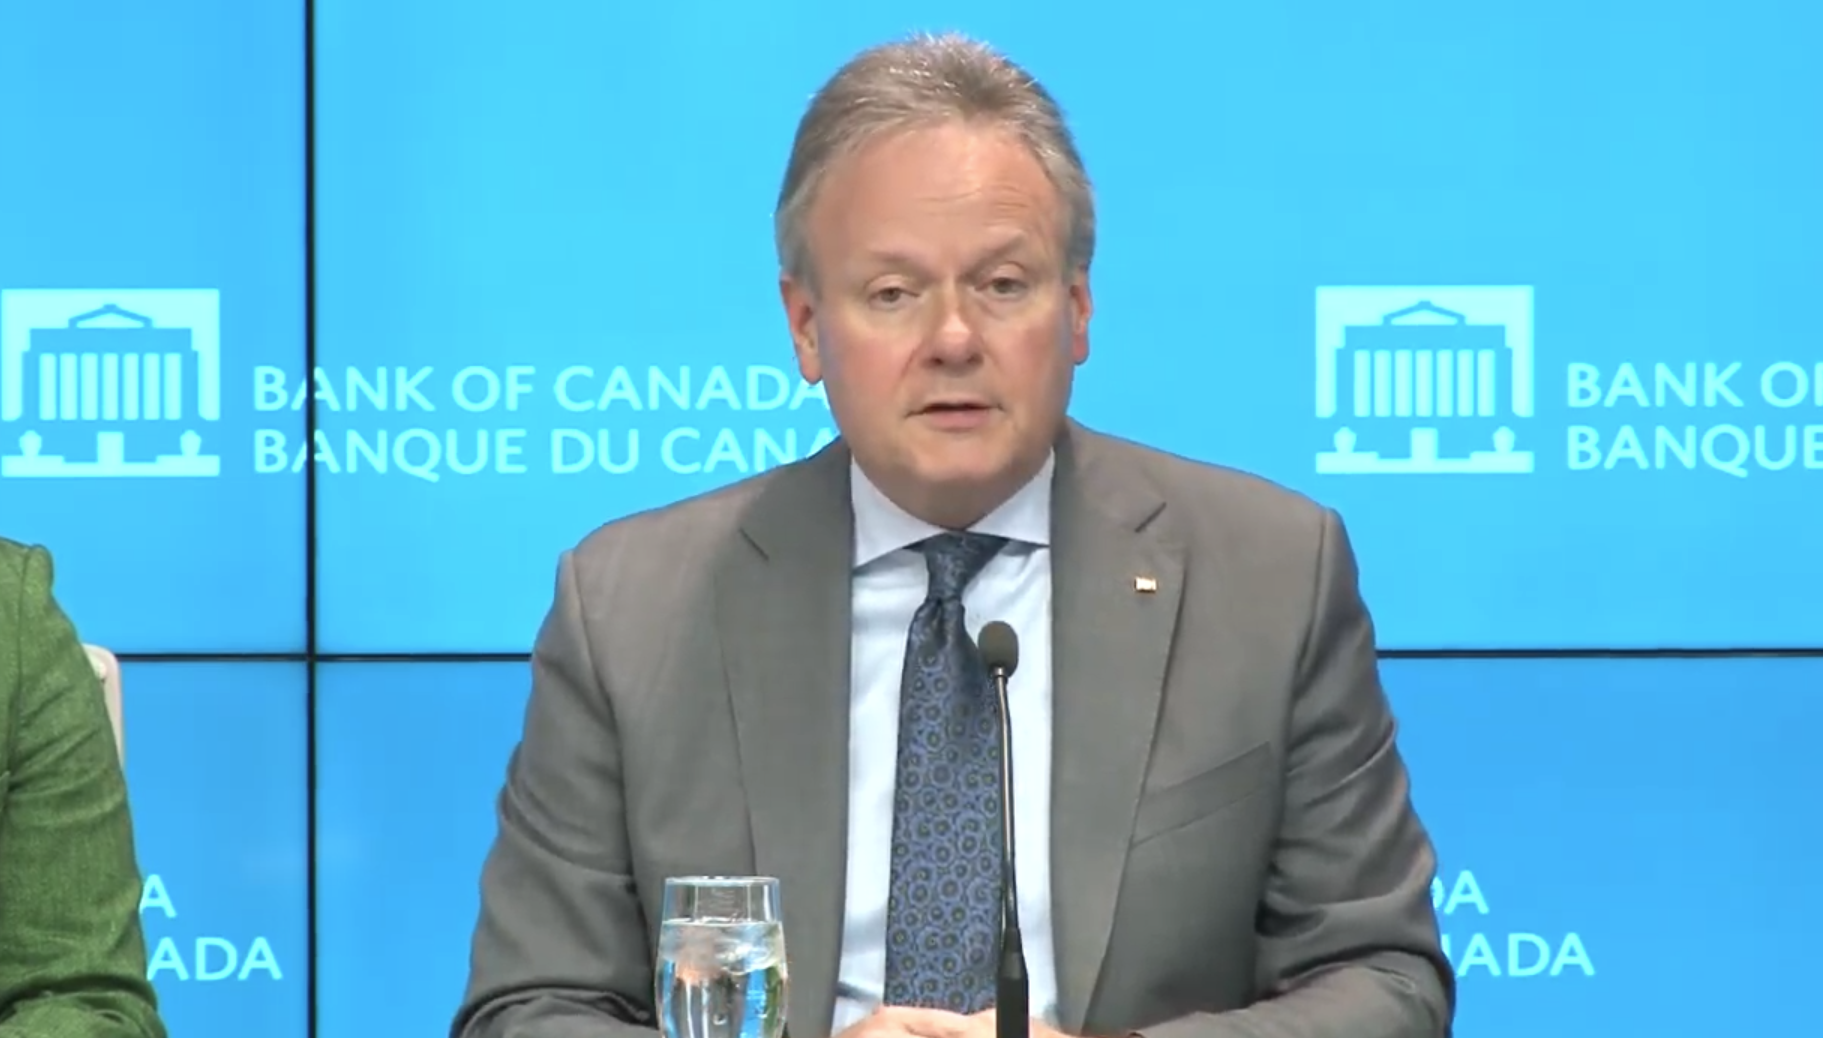 Comments from Poloz and Wilkins: